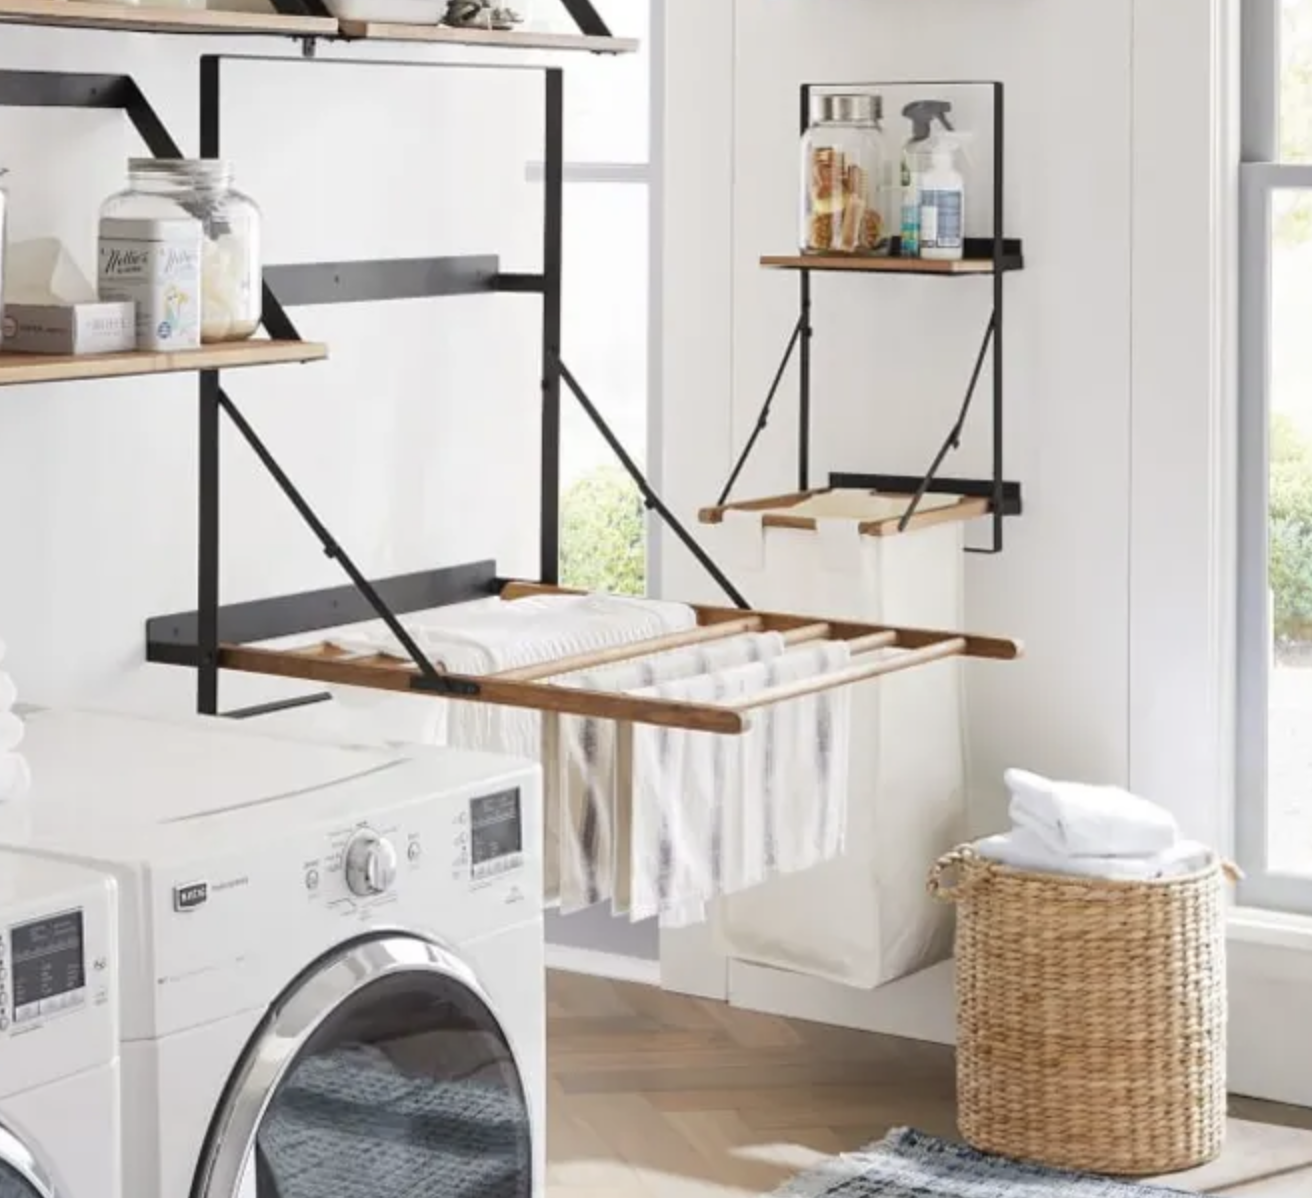 how to organize your laundry room using vertical space for hanging clothes